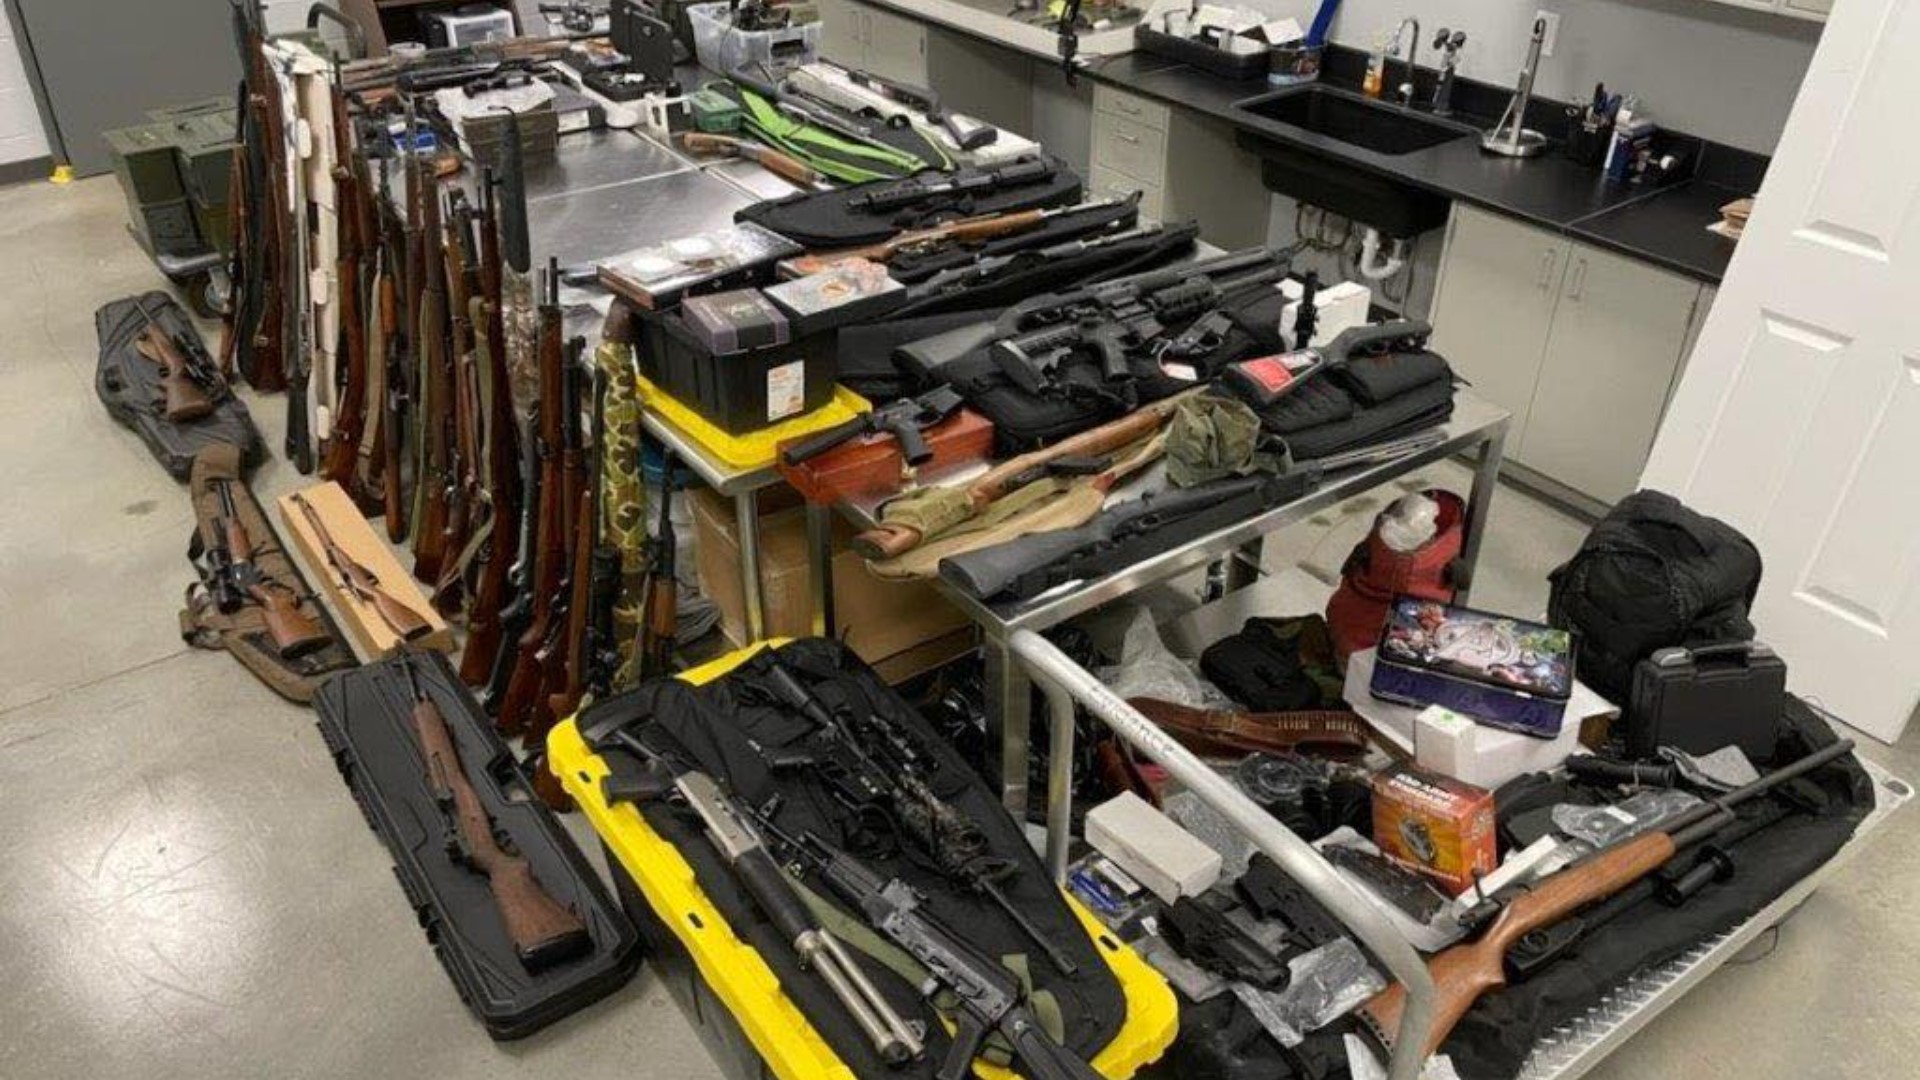 After nearly a dozen arrests, a Paulding County crime ring has been busted, leading to the recovery of dozens of stolen firearms and large quantities of drugs.